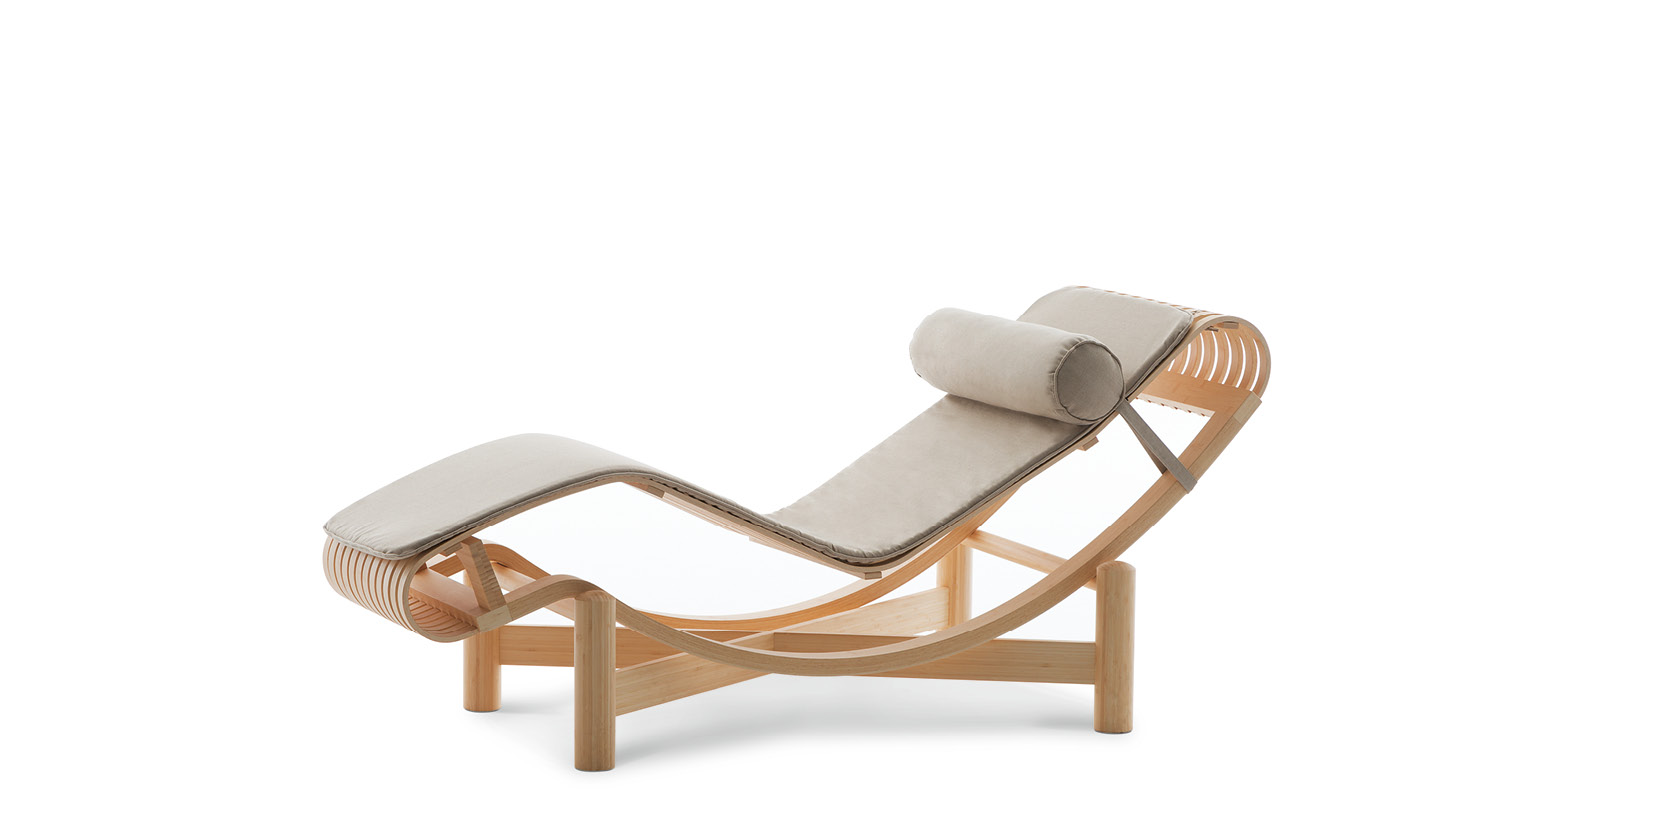 Tokyo chaise longue by Charlotte Perriand | Cassina